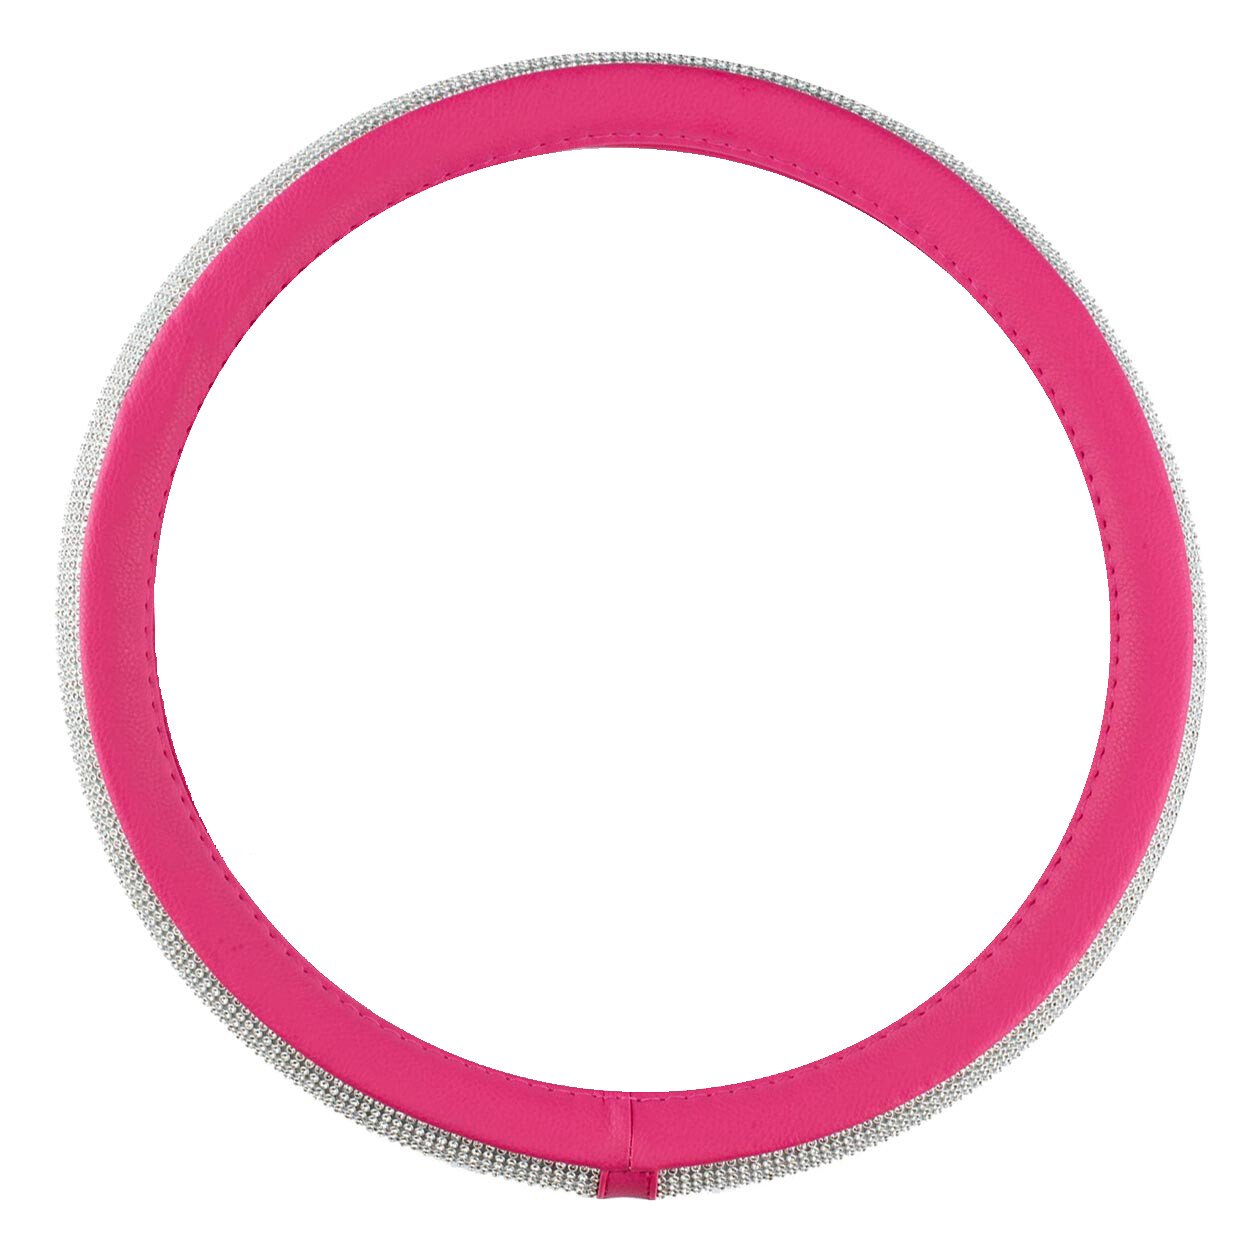 Amio steering wheel cover SWC-36-M - Ø 37-39 cm- Pink/Silver thumb